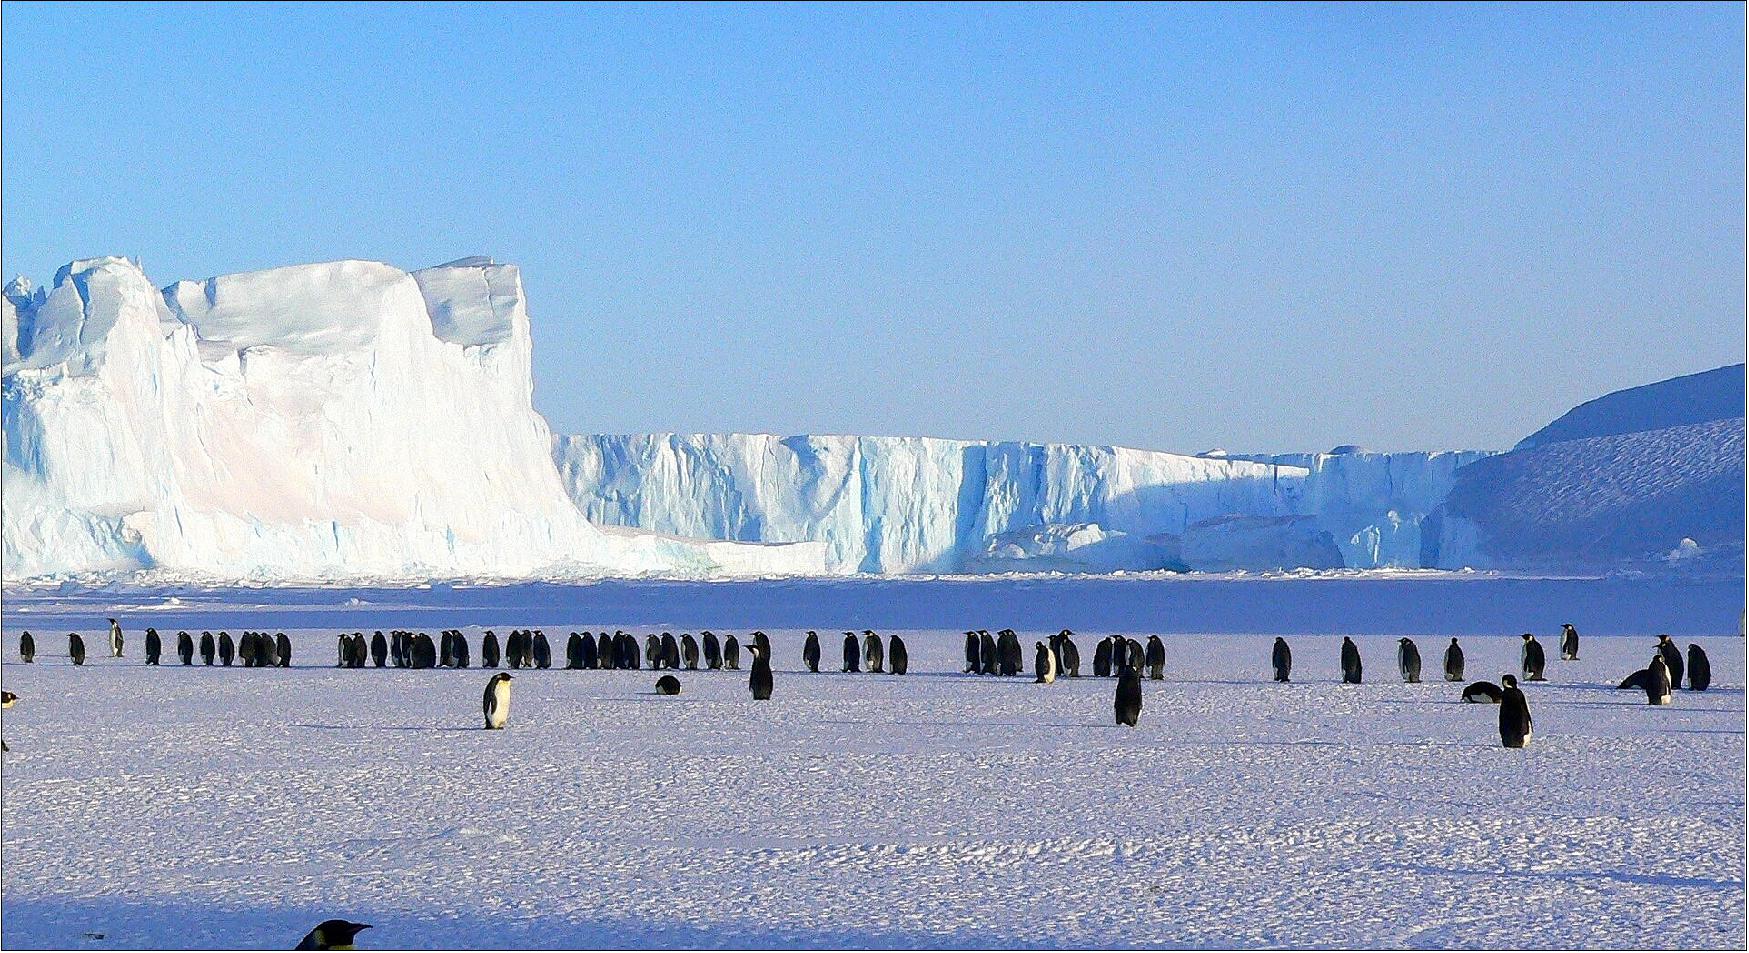 Figure 18: Antarctica is fifth in size among the world’s continents. Its landmass is almost wholly covered by a vast ice sheet. The continental ice sheet contains approximately 29 million km3 of ice, representing about 90 percent of the world’s total. The average thickness is about 2.45 km (image credit: Pixabay)